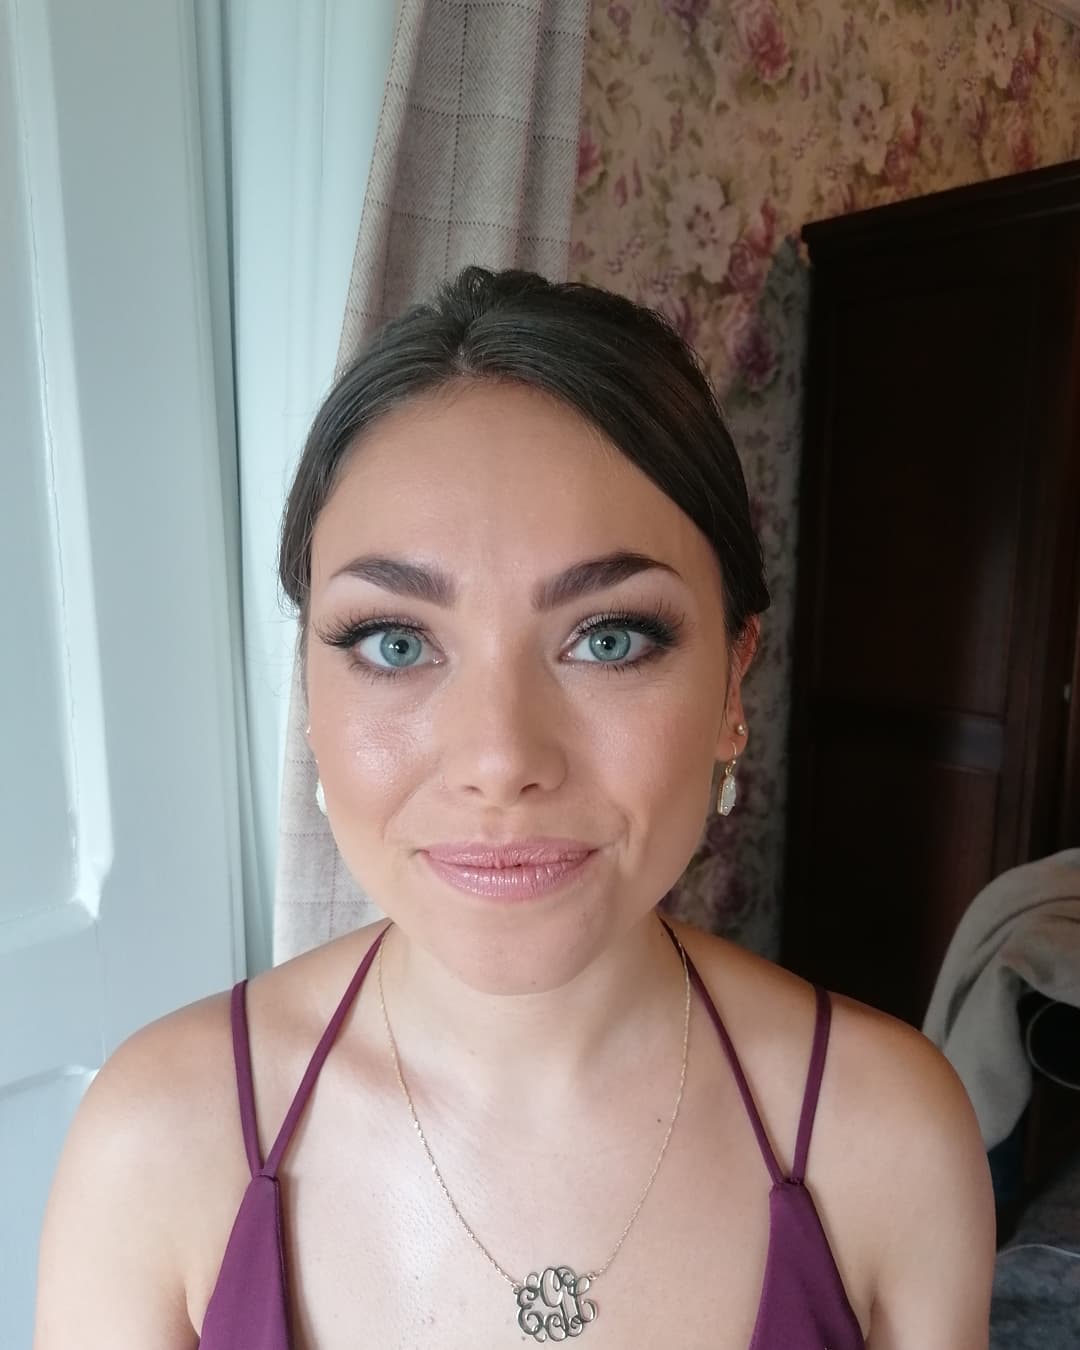 ELLEN 💖a lot of love for this lady who kept the momentum going all morning for the bride Johanna. She reminded me of a green eyed mila cunis. She wanted some drama on the eyes, fluffy lashes and G
Glowing skin.
.
.
#bridalmakeupartist #irishweddings #americanbridalparty #castleweddings
#irishmakeupartist